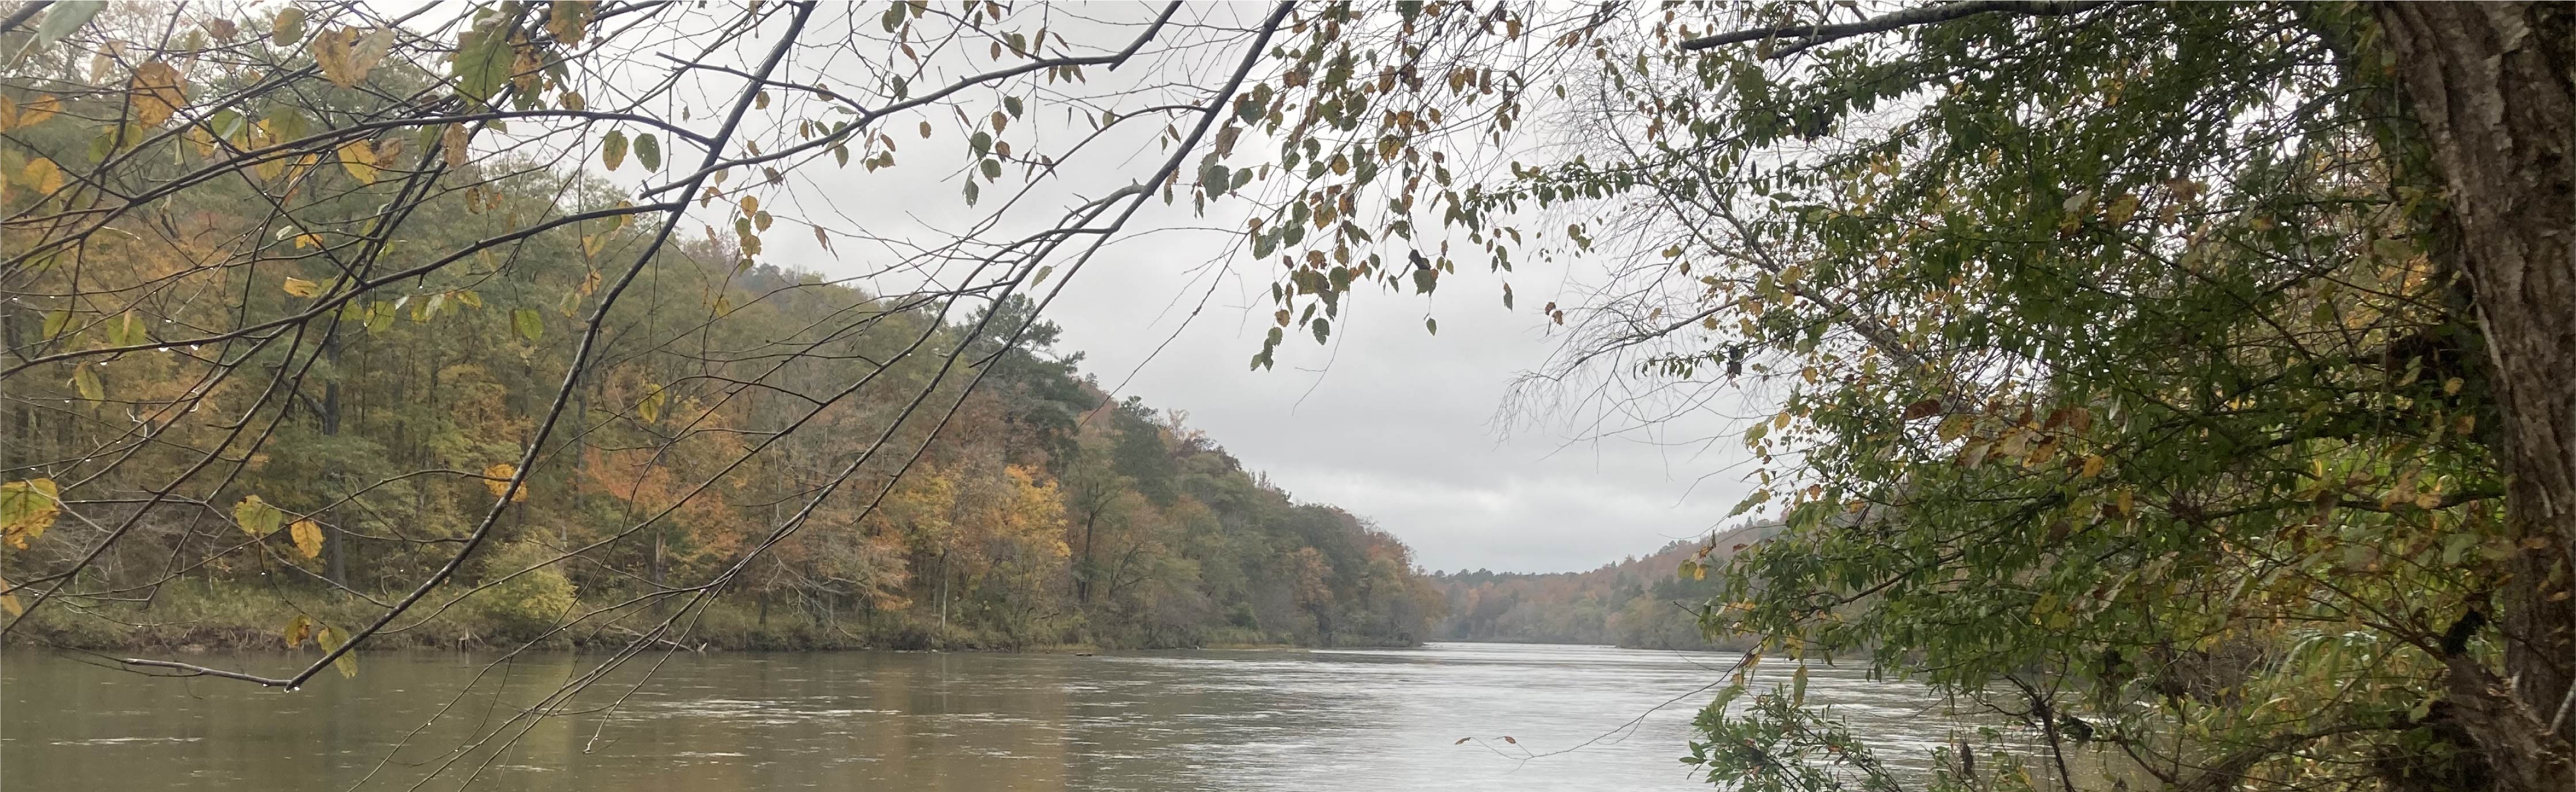 The Flint river flows upstream in the fall with a dark and cloudy sky.